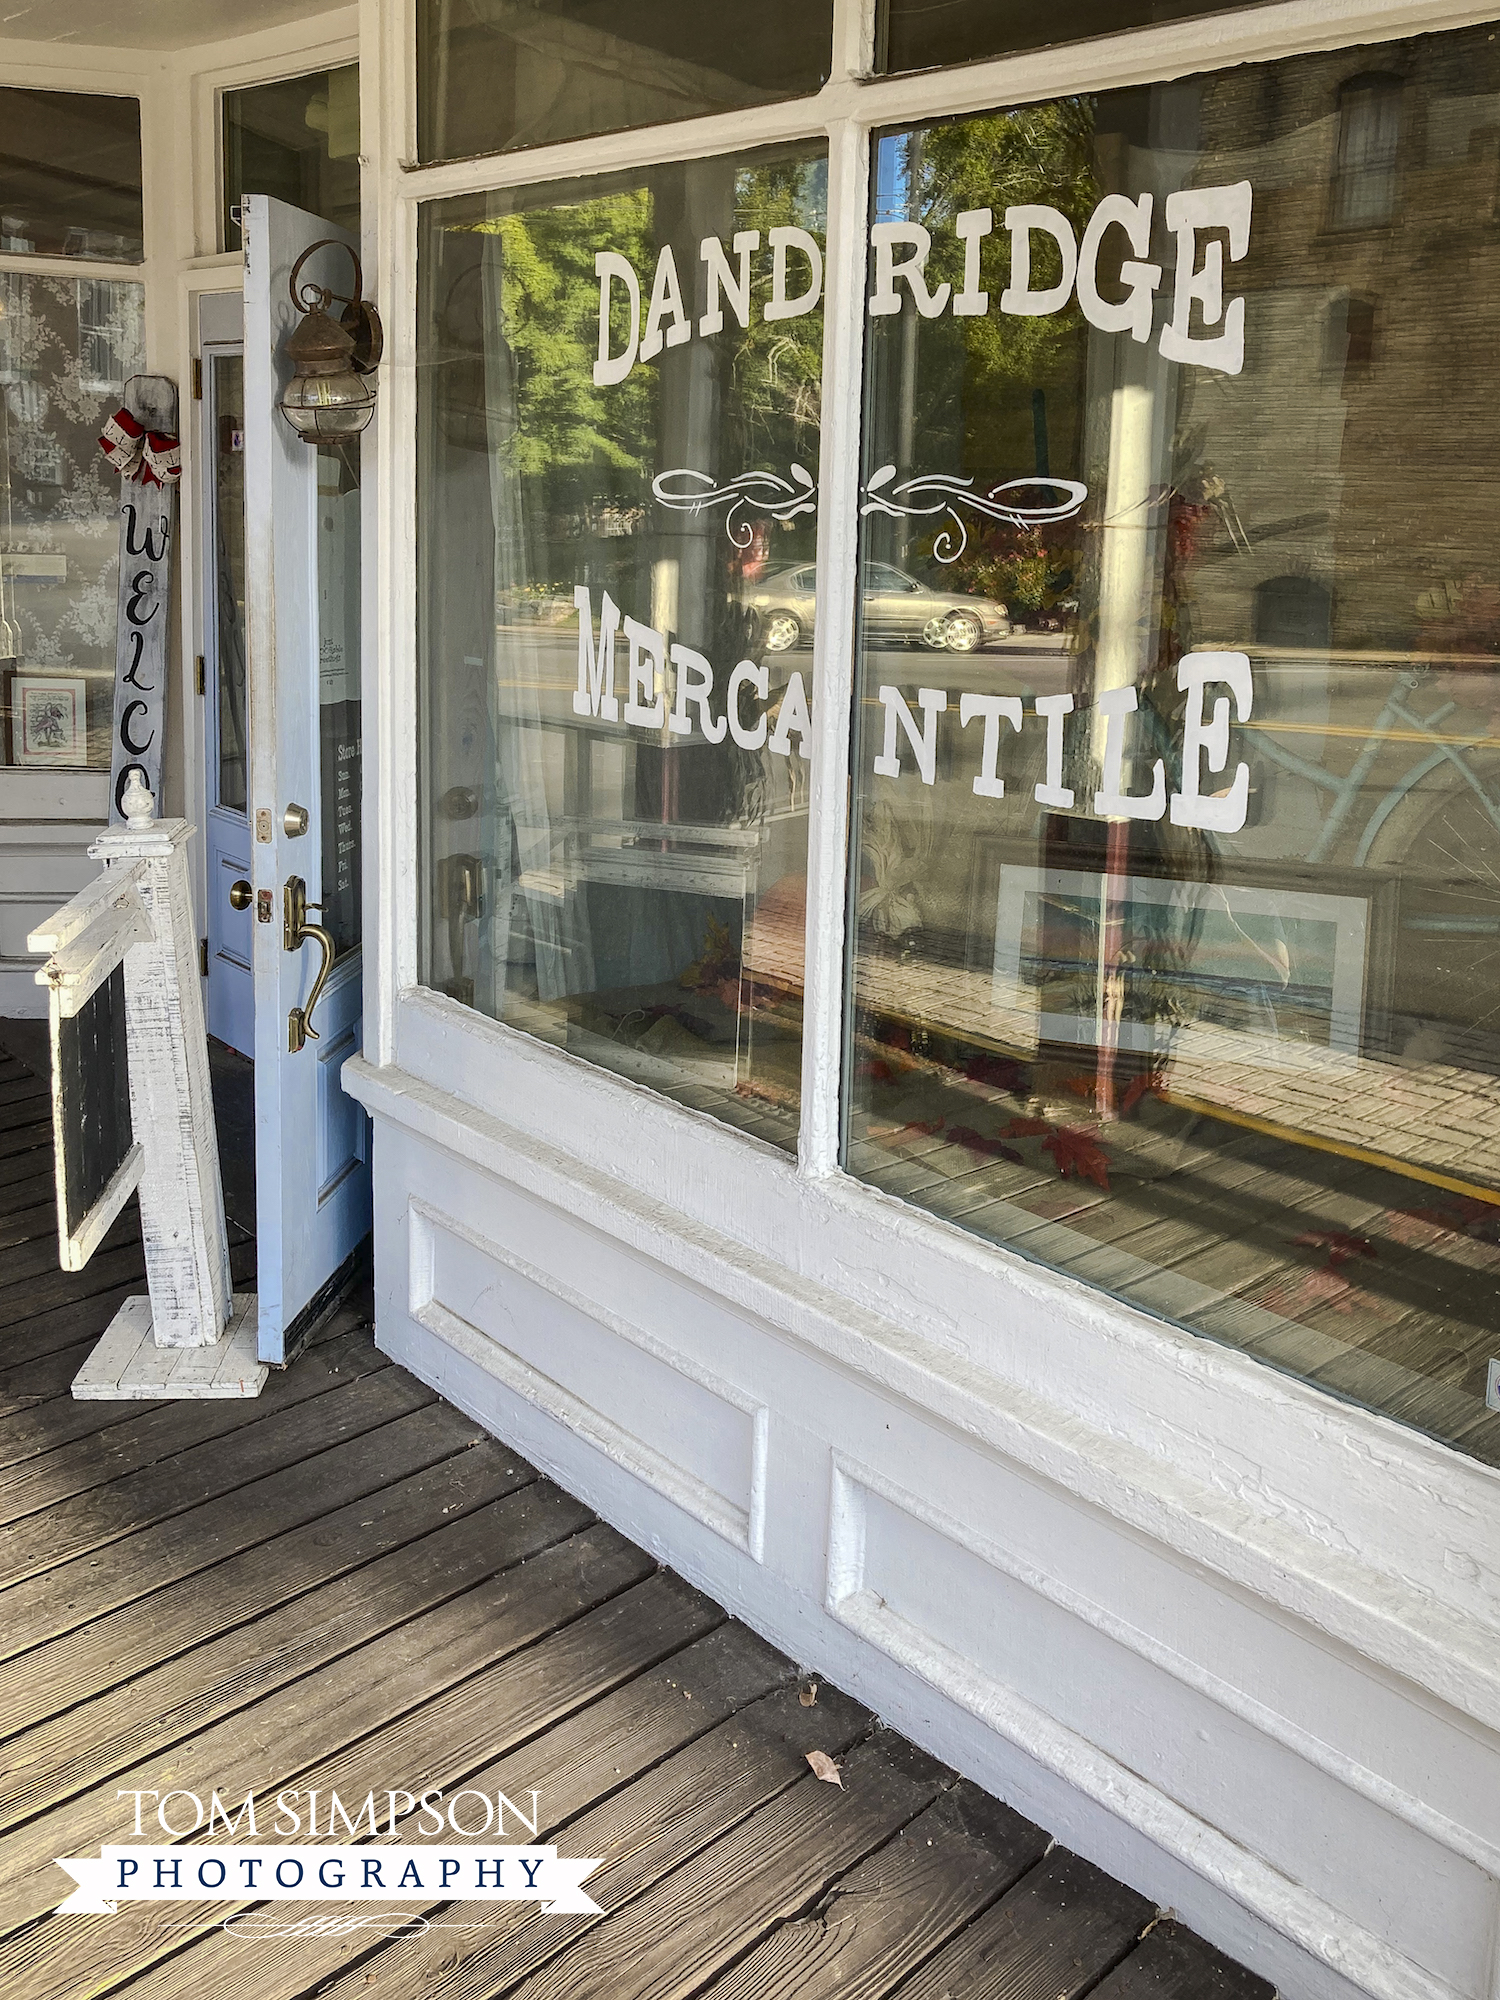 dandridge mercantile in tennessee's 2nd oldest town